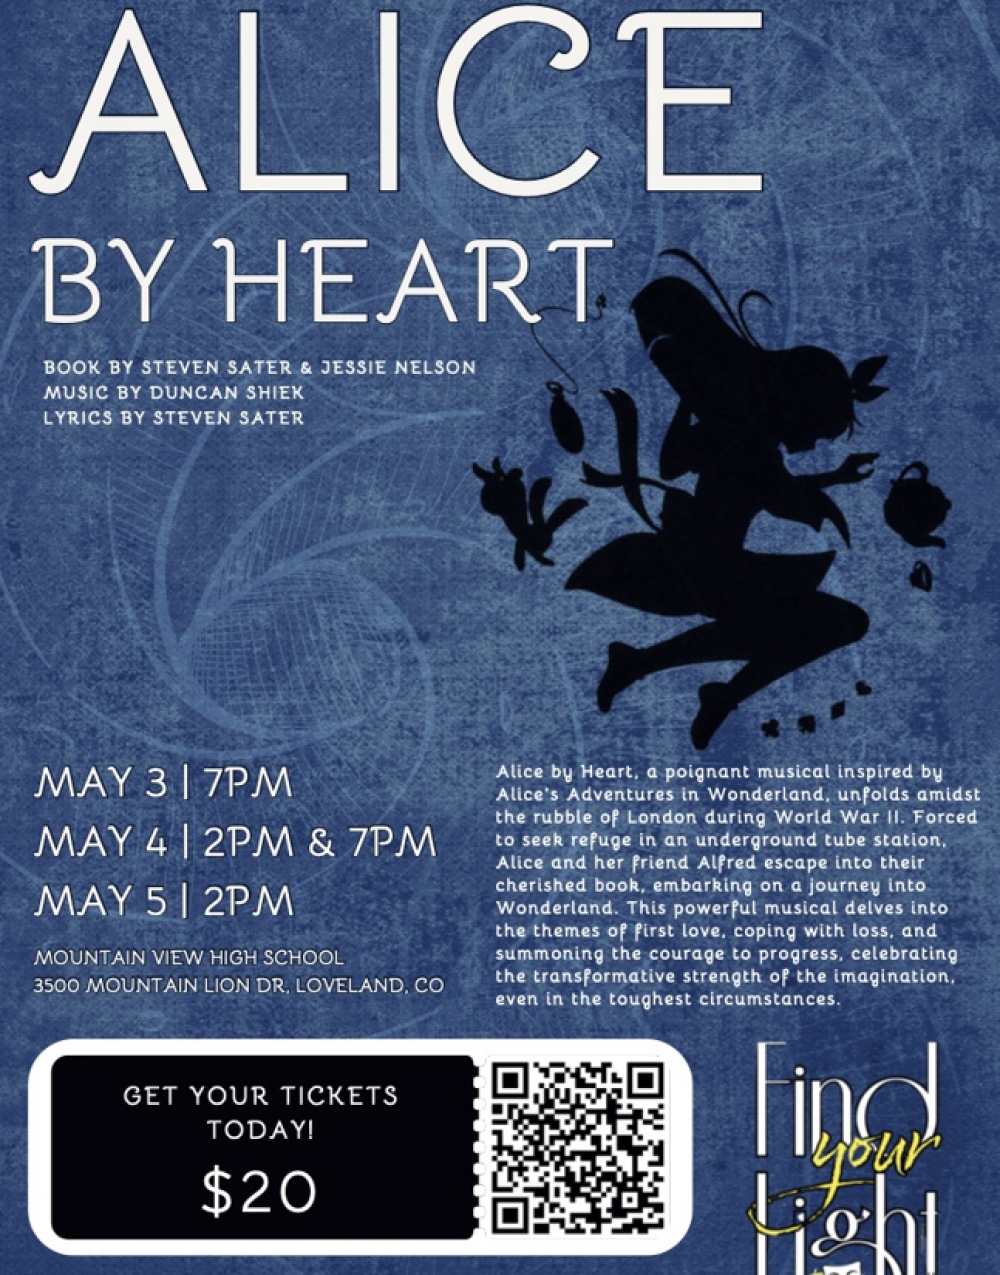 Alice By Heart - Find Your Light Stage Mag